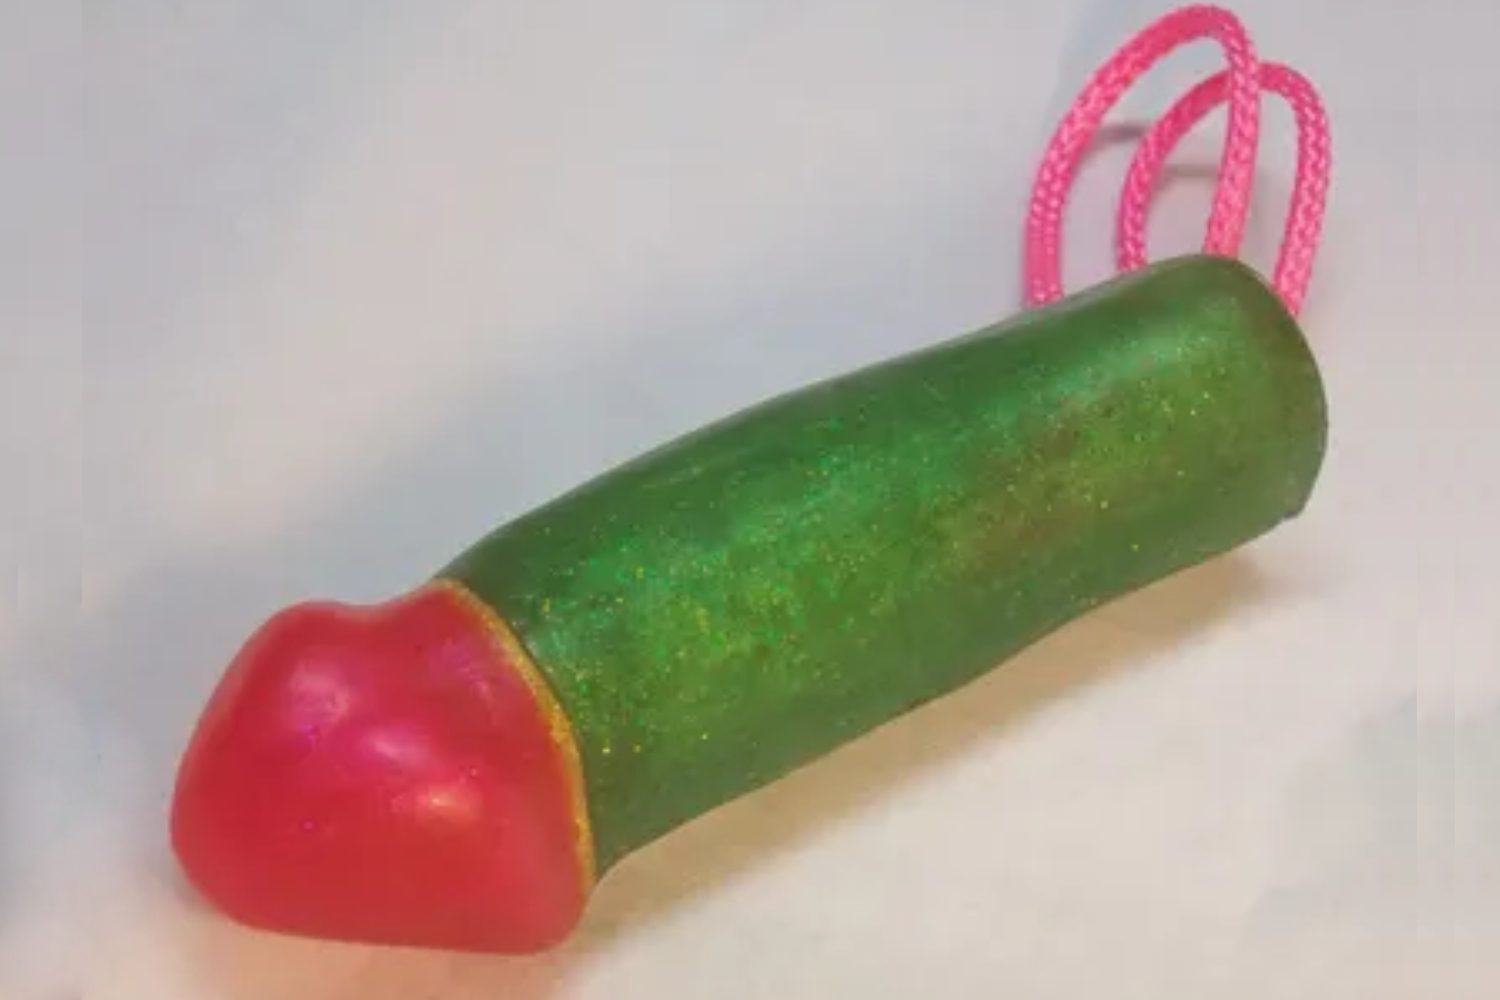 A green and red toy with pink handles.